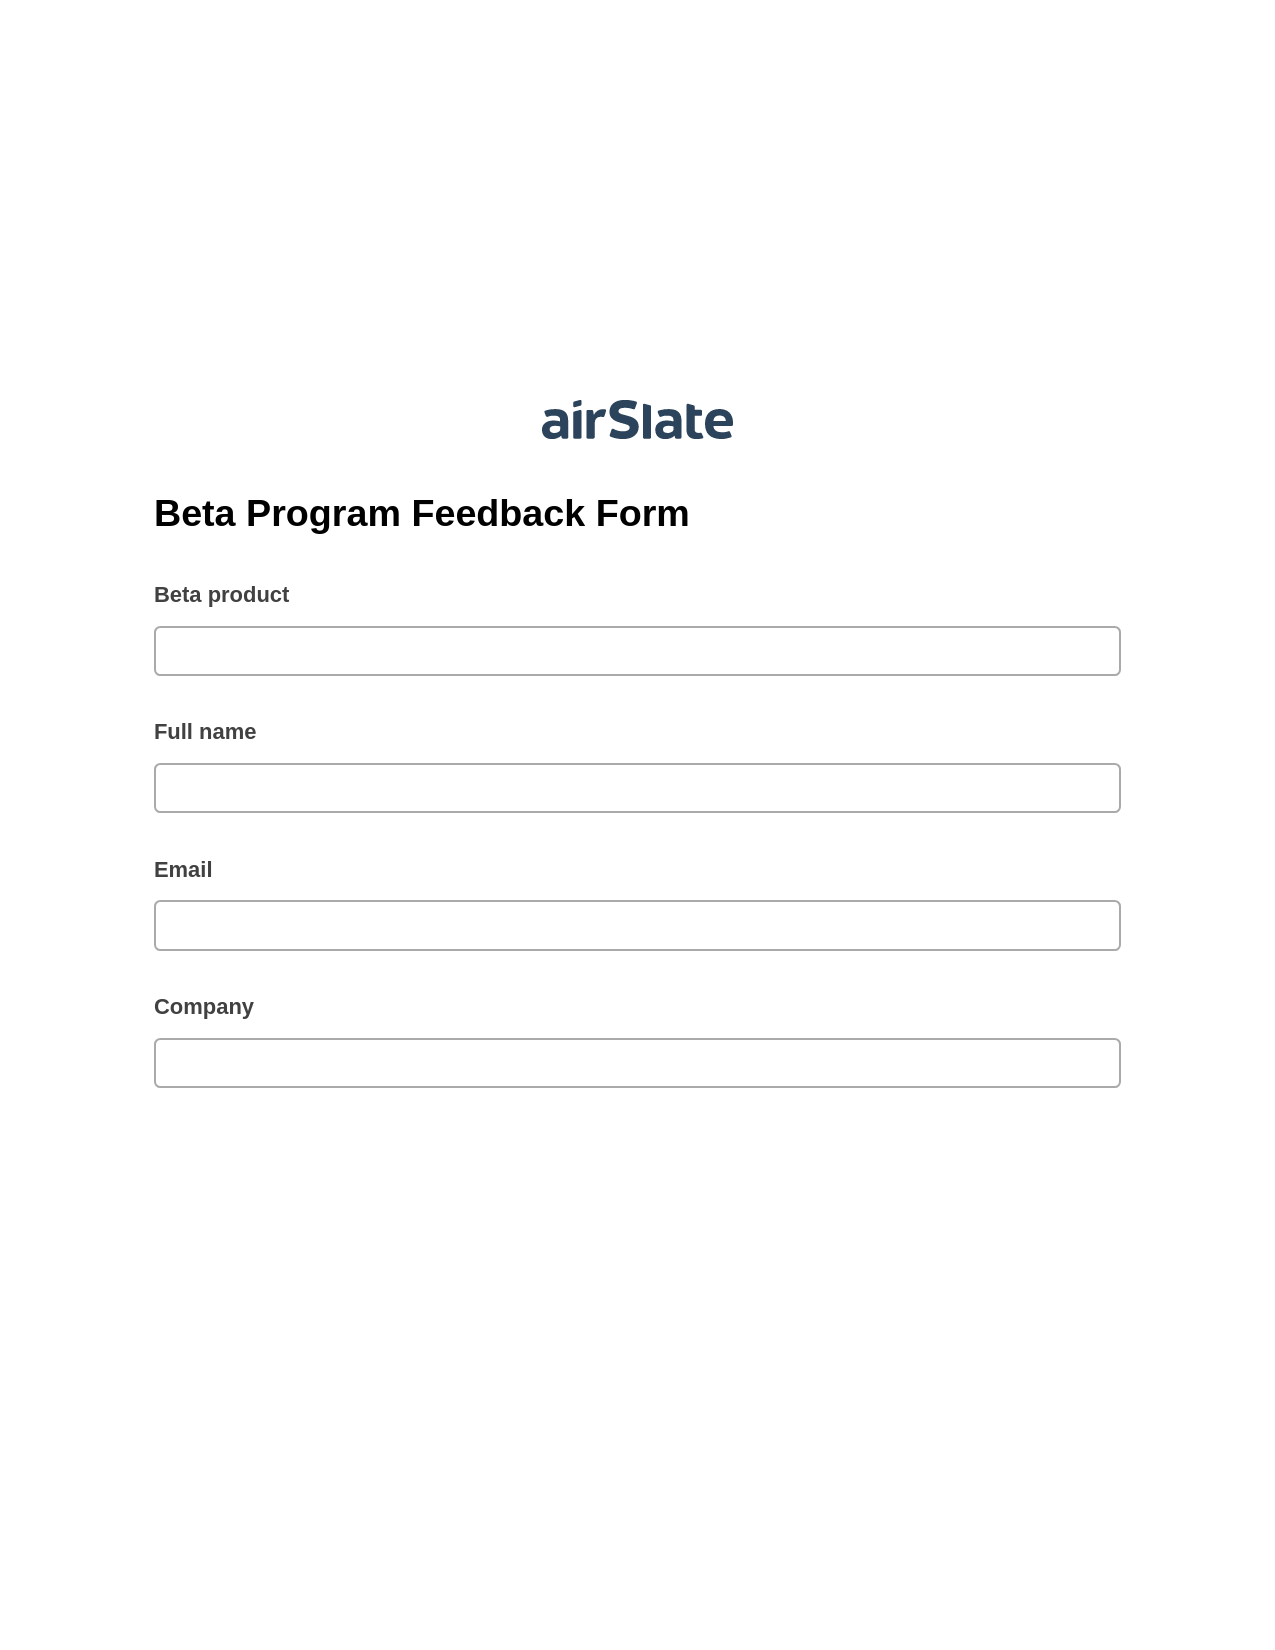 Beta Program Feedback Form Pre-fill Slate from MS Dynamics 365 Records Bot, Set Signature Type Bot, Export to NetSuite Record Bot